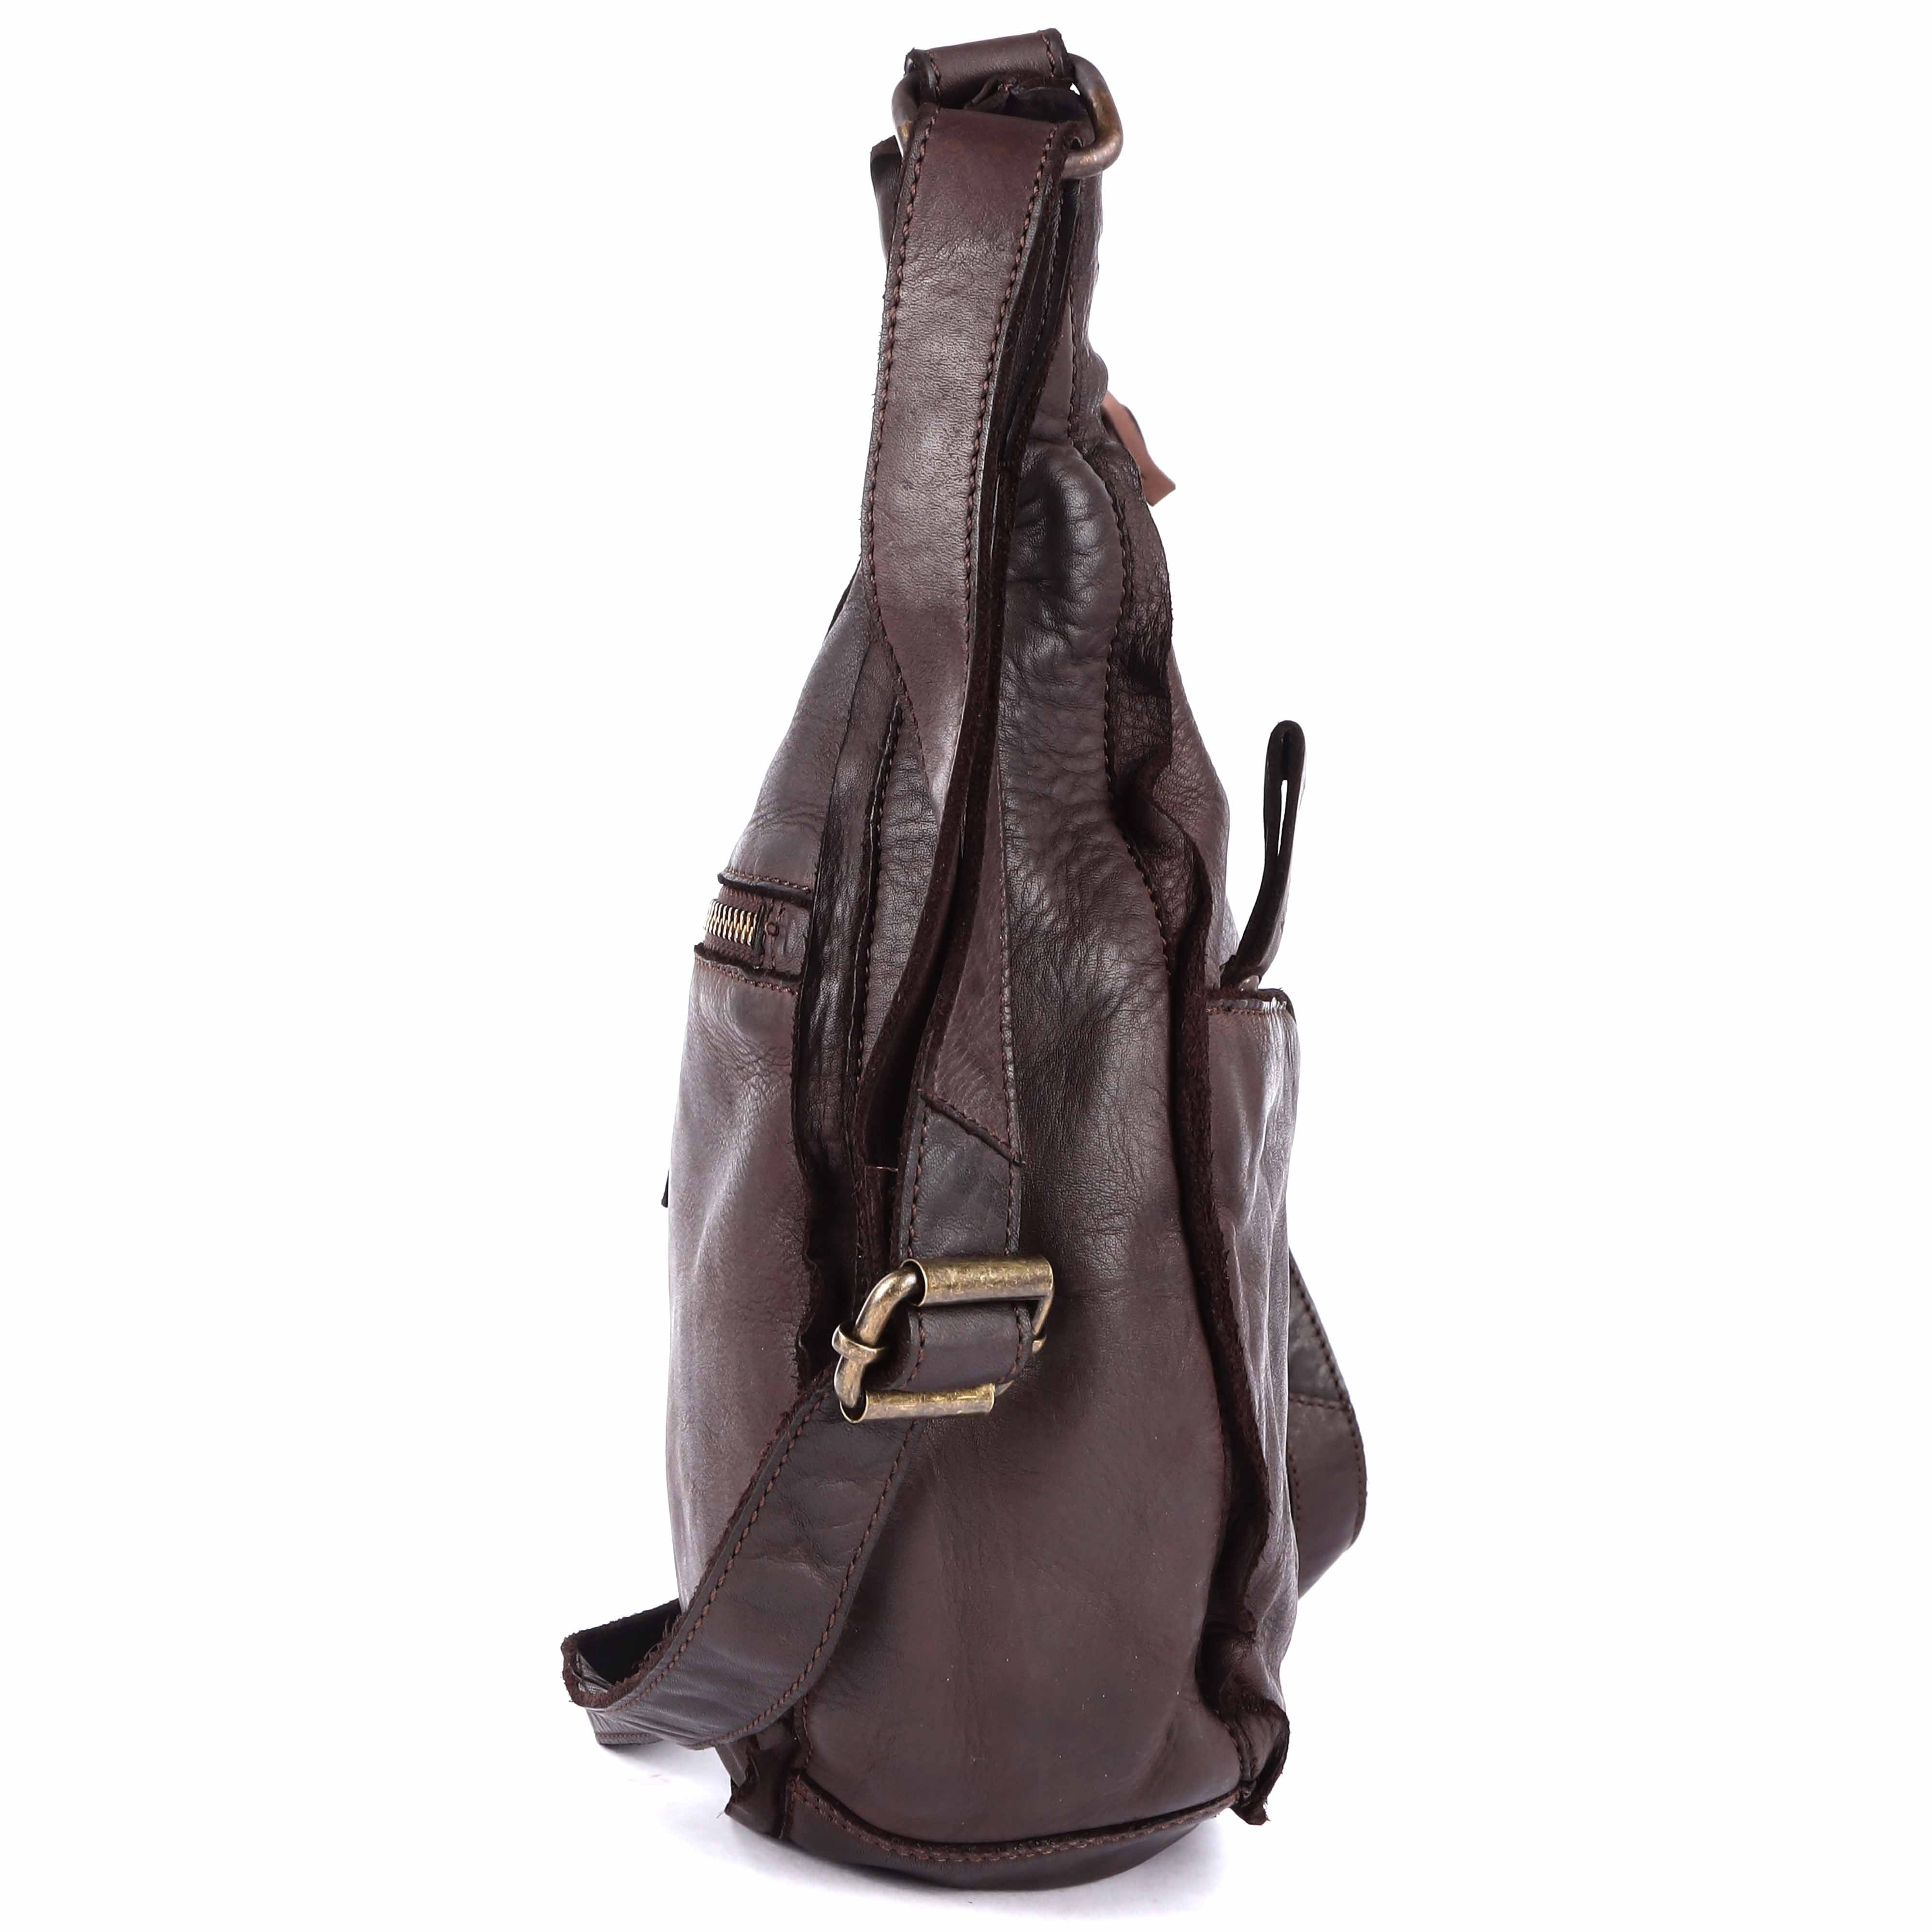 Wendall Sling Backpack - Urban Expressions